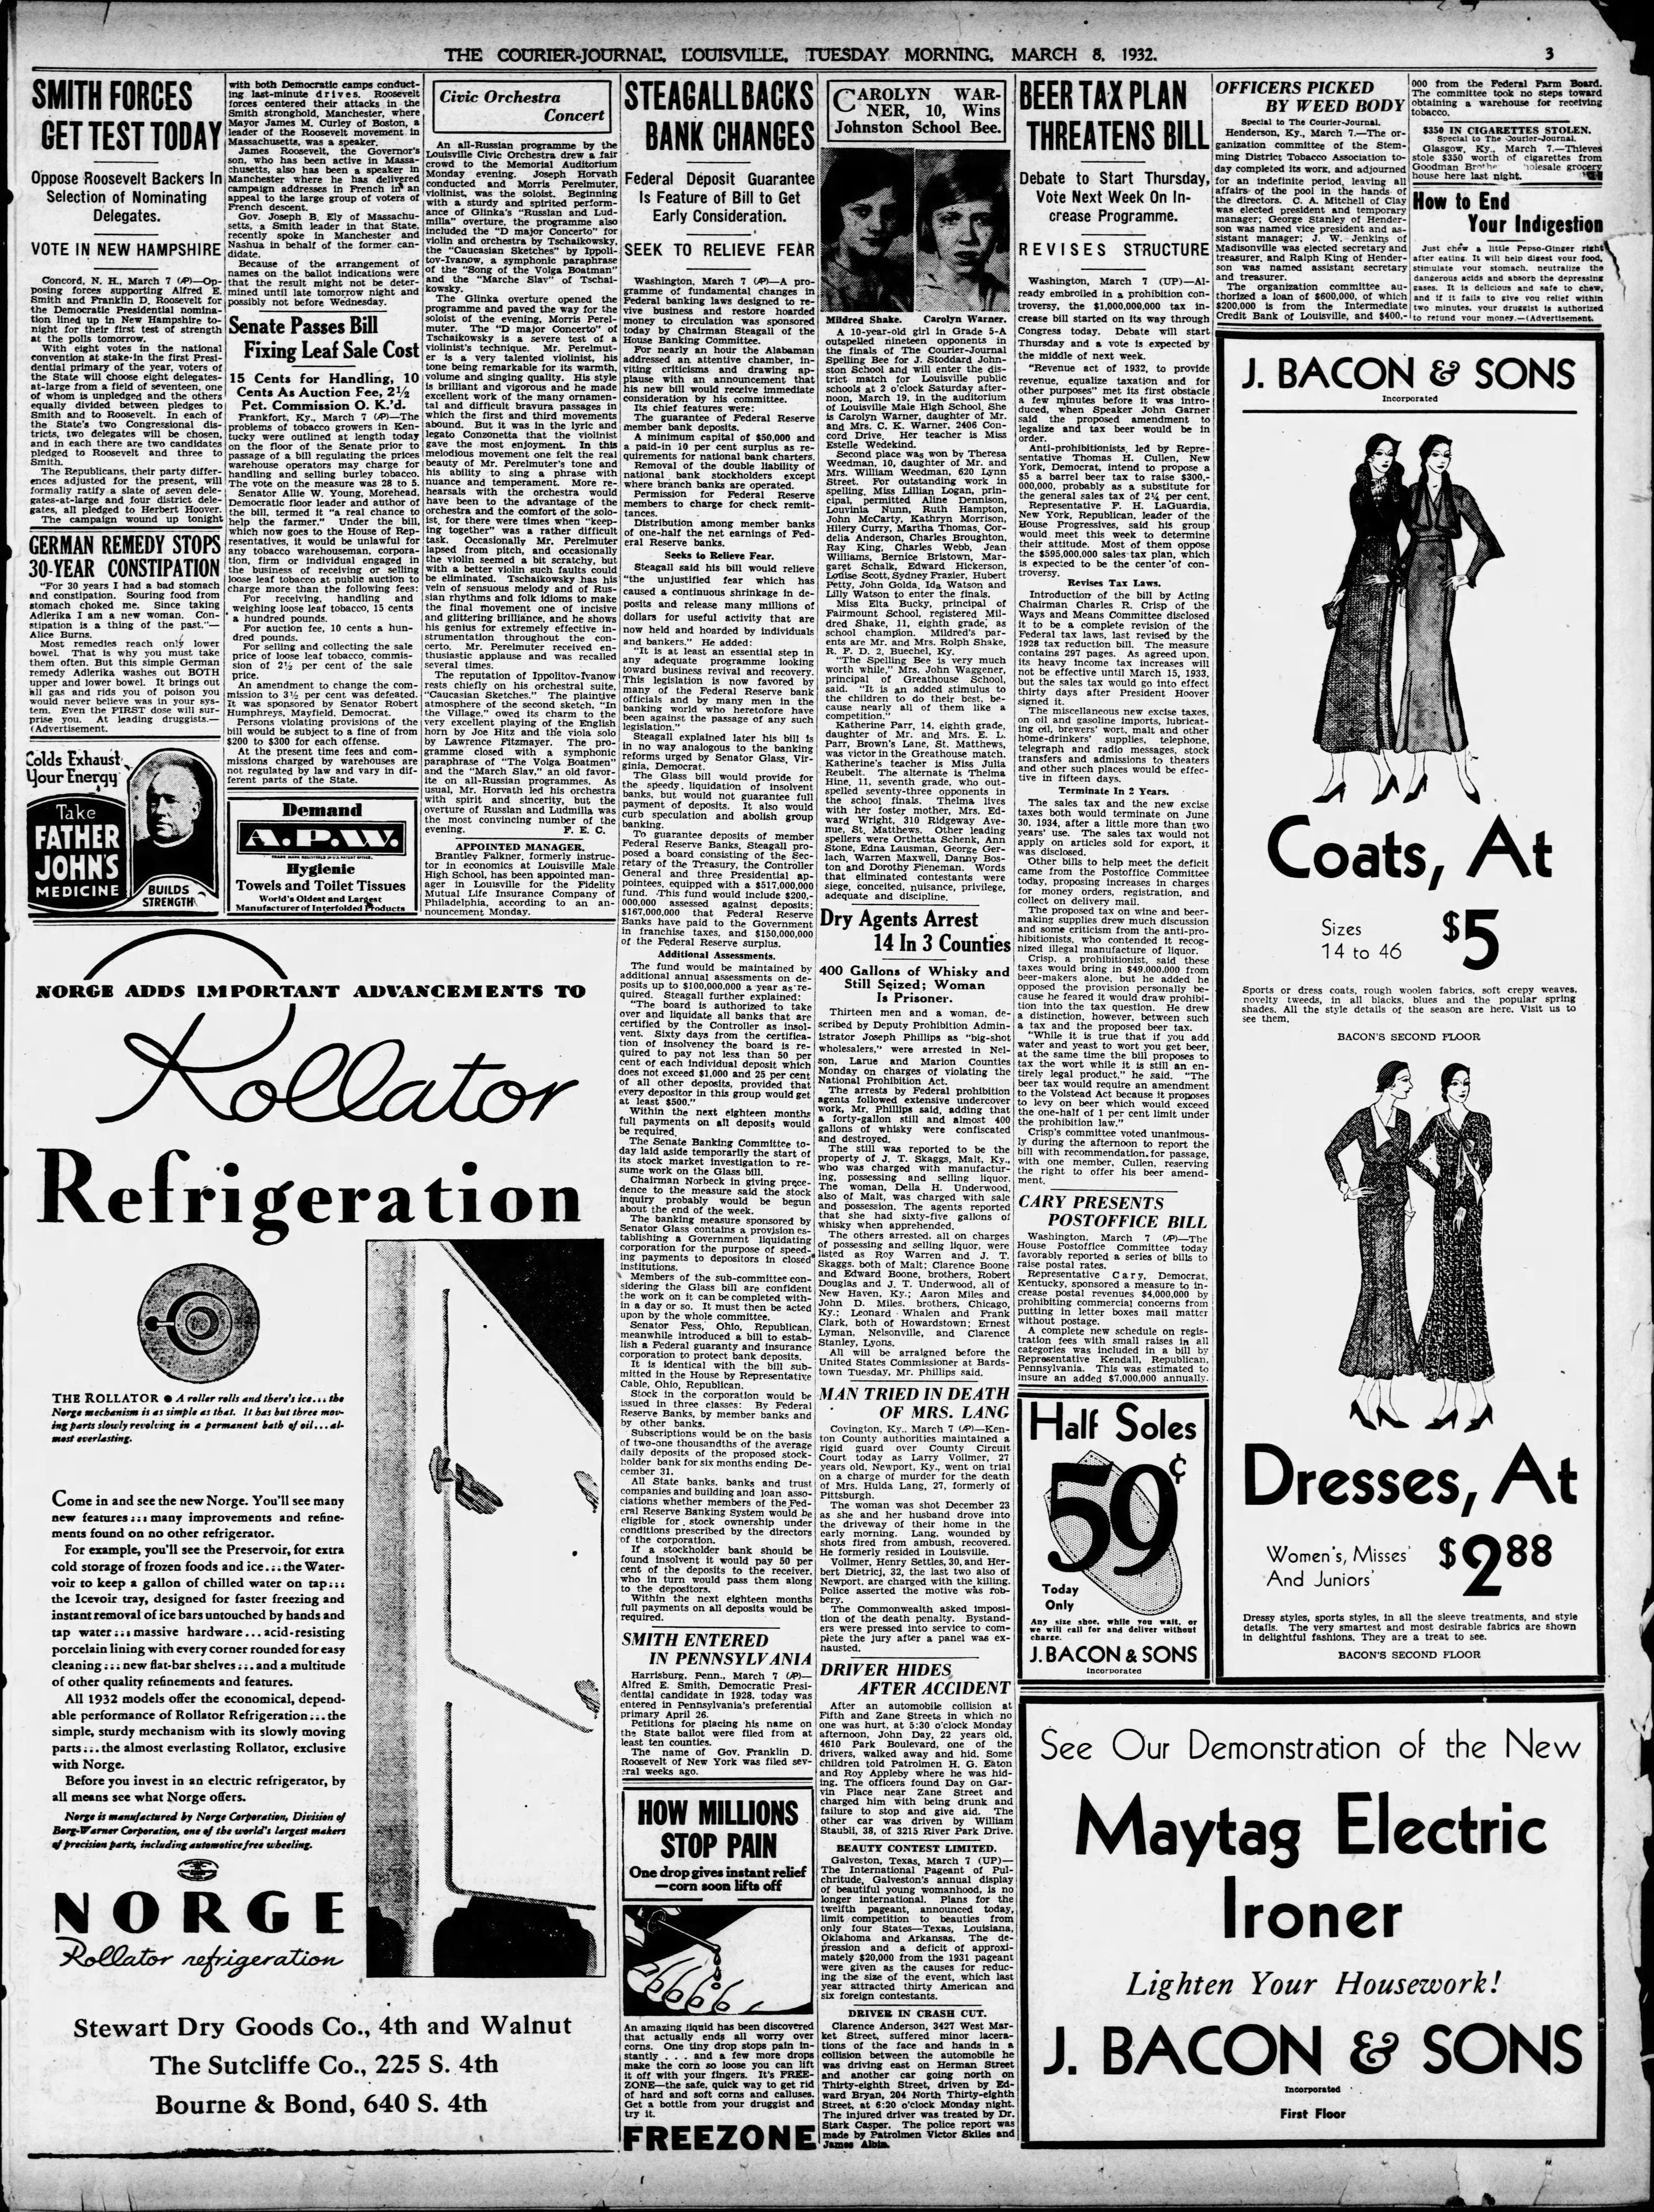 The_Courier_Journal_Tue__Mar_8__1932_.jpg